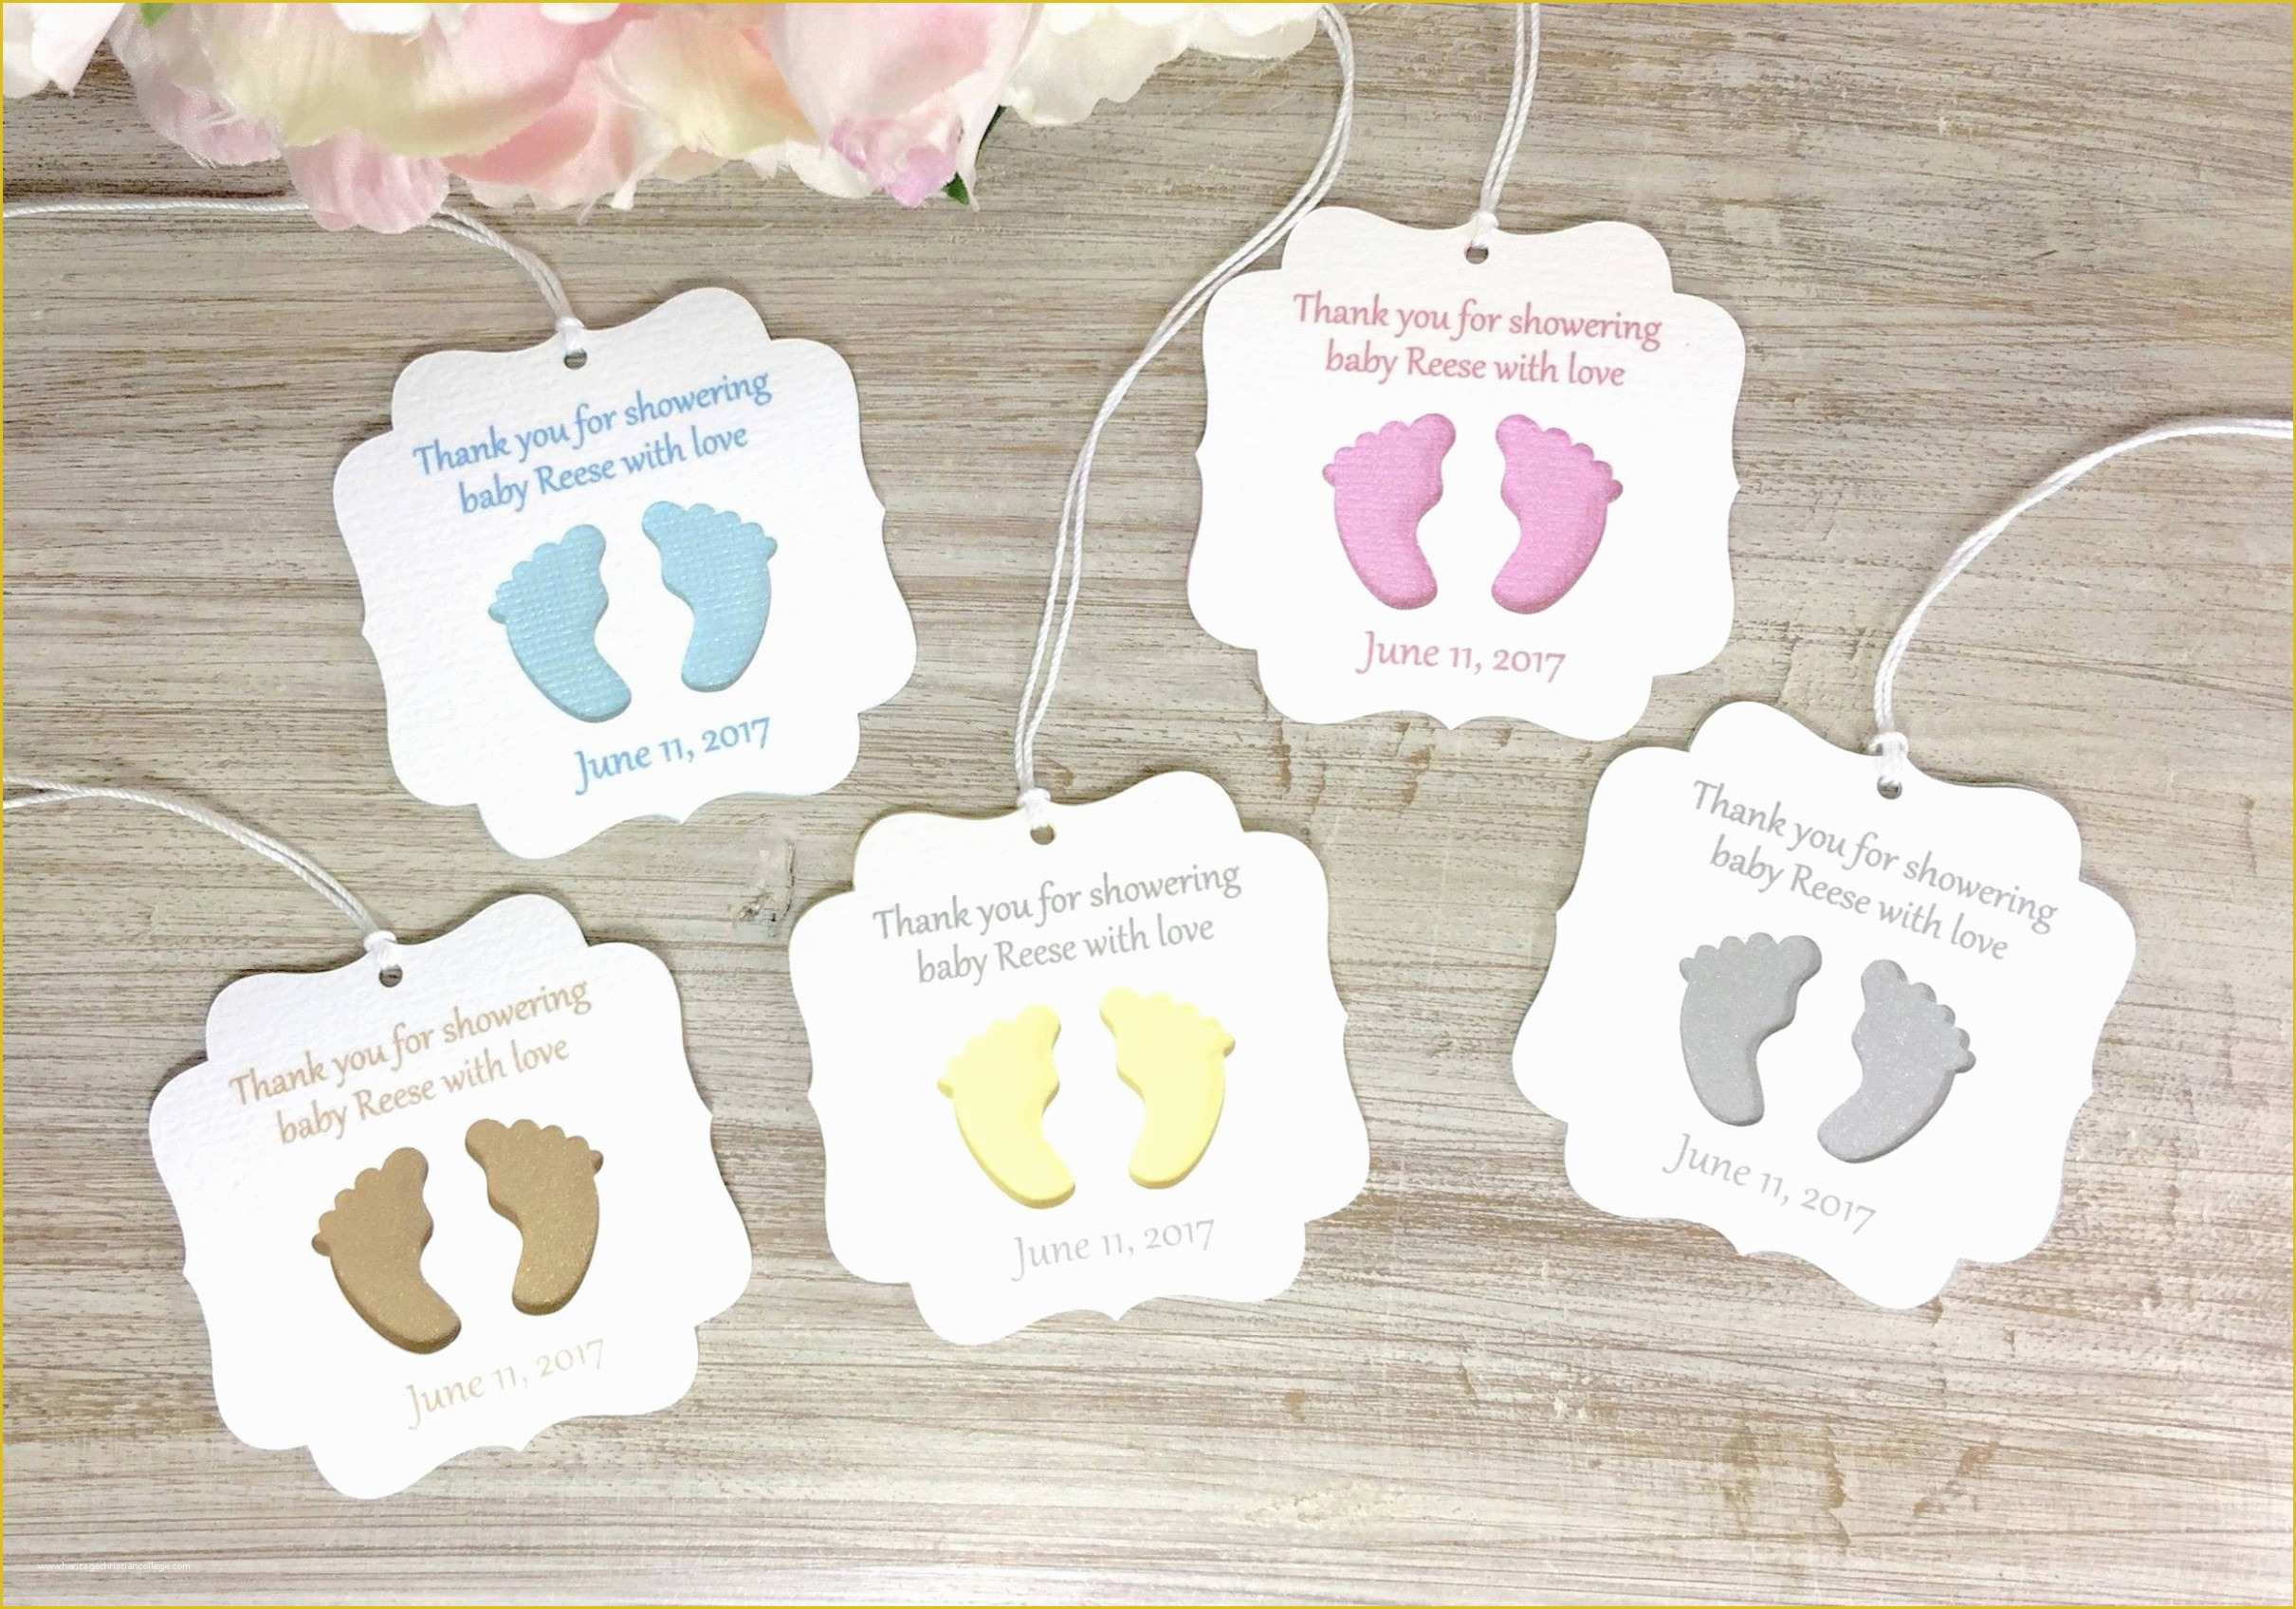 Free Printable Baby Shower Favor Tags Template Of Simple Guidance for You In